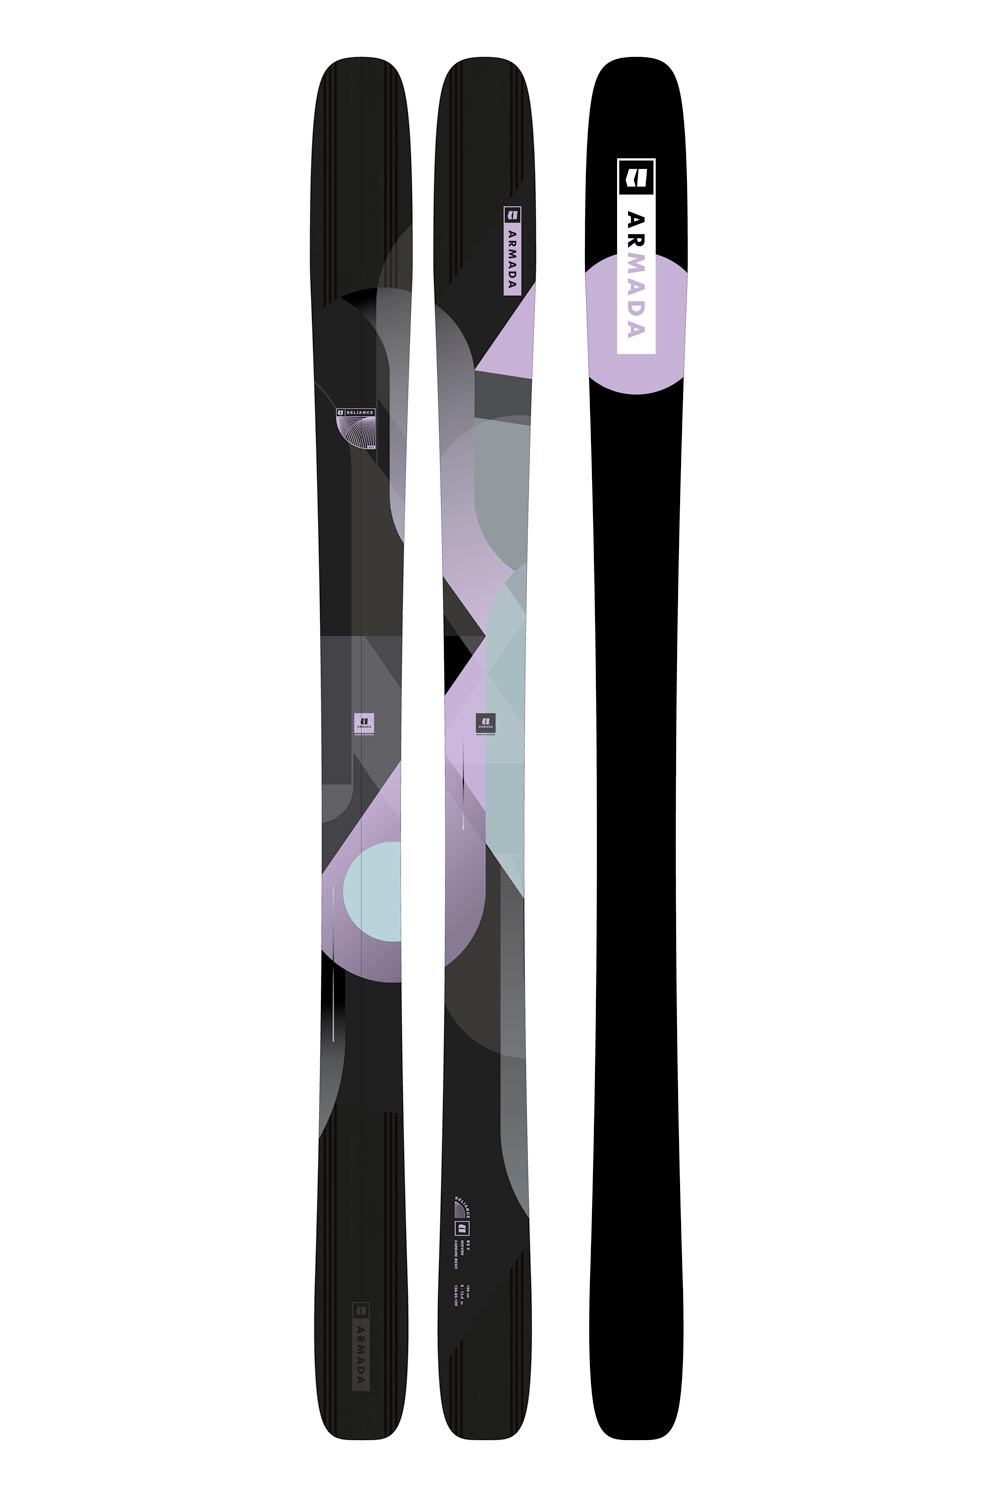 women's Armada Reliance 82C skis, black with light purple and mint green accents.